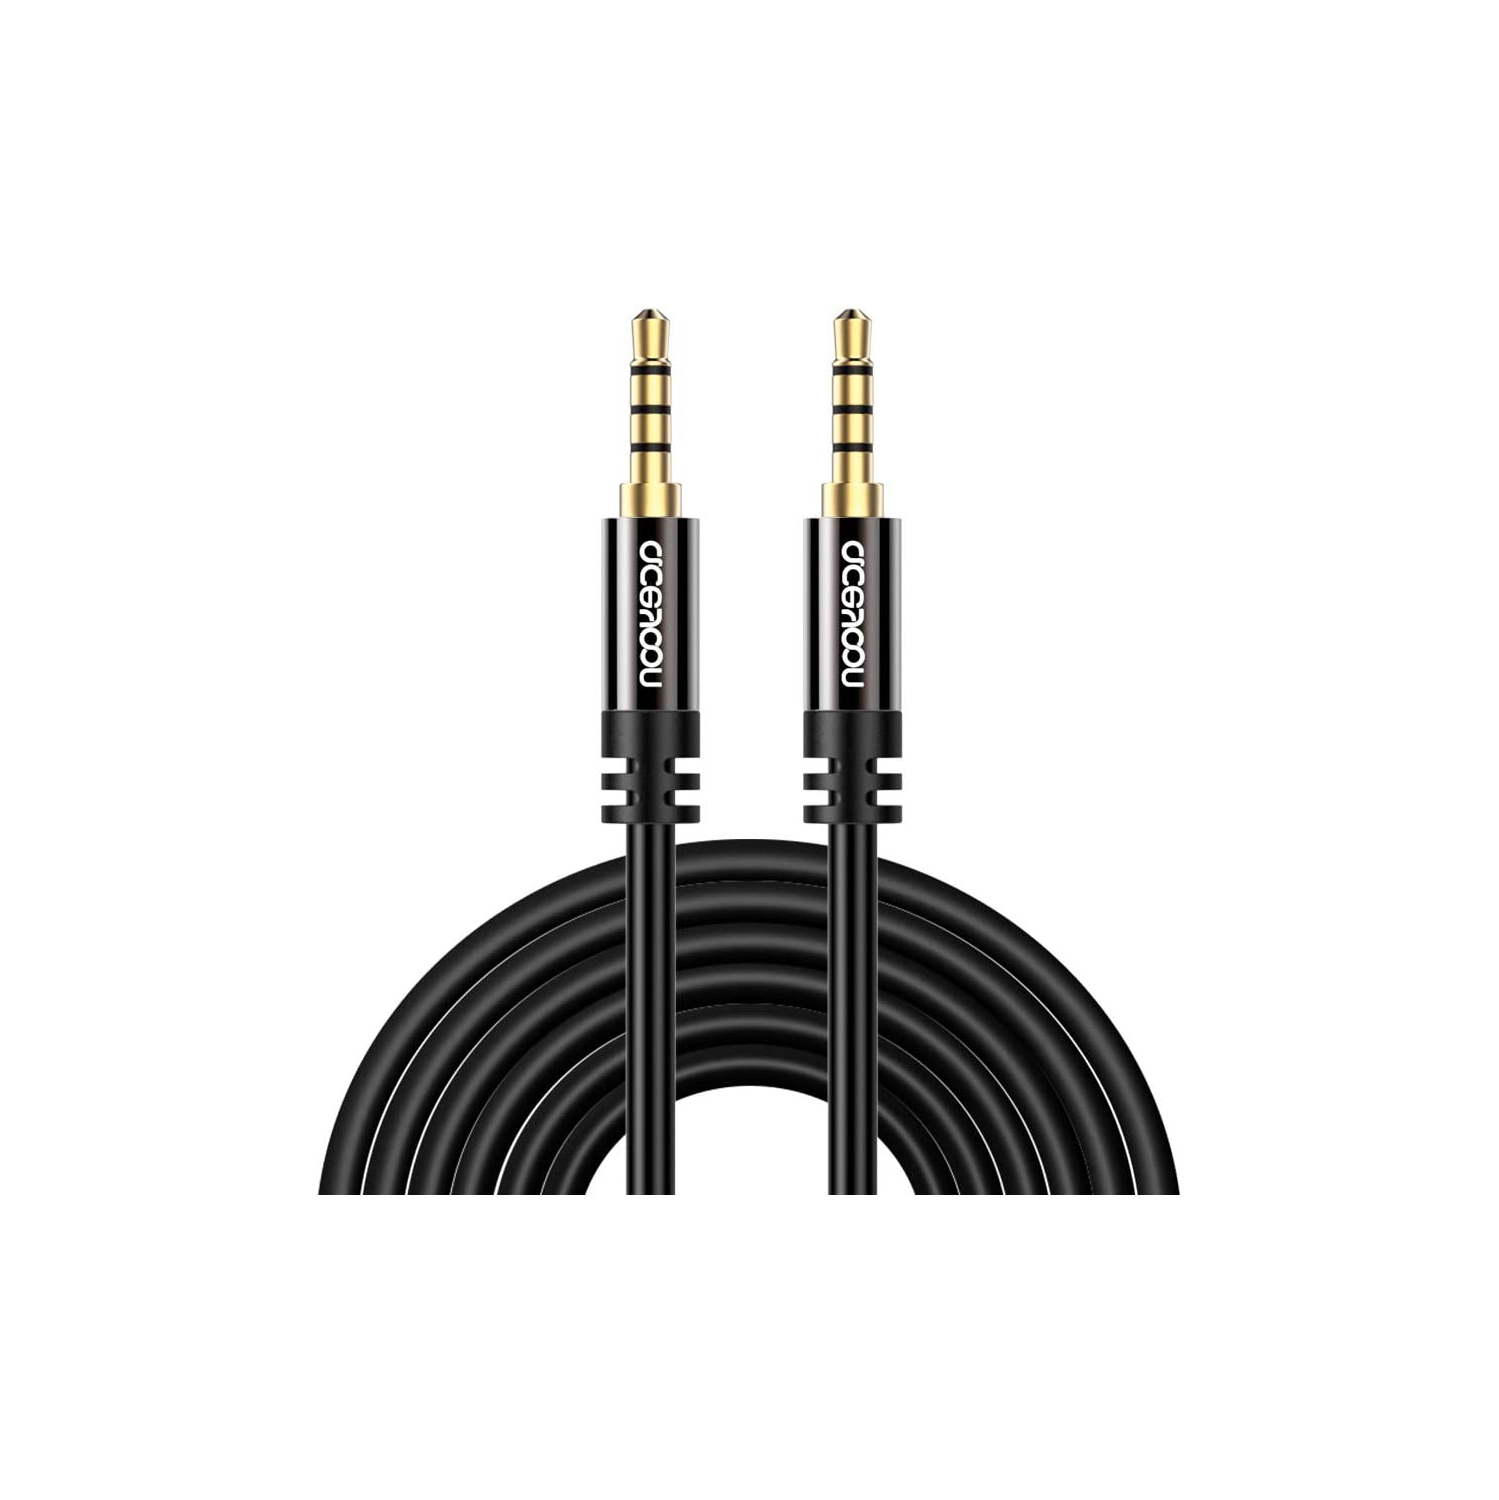 3.5mm Aux Cable TRRS Cable 16ft Long Aux Cord 5m Male to Male 4 Pole Stereo Audio Cable Headphone Cable